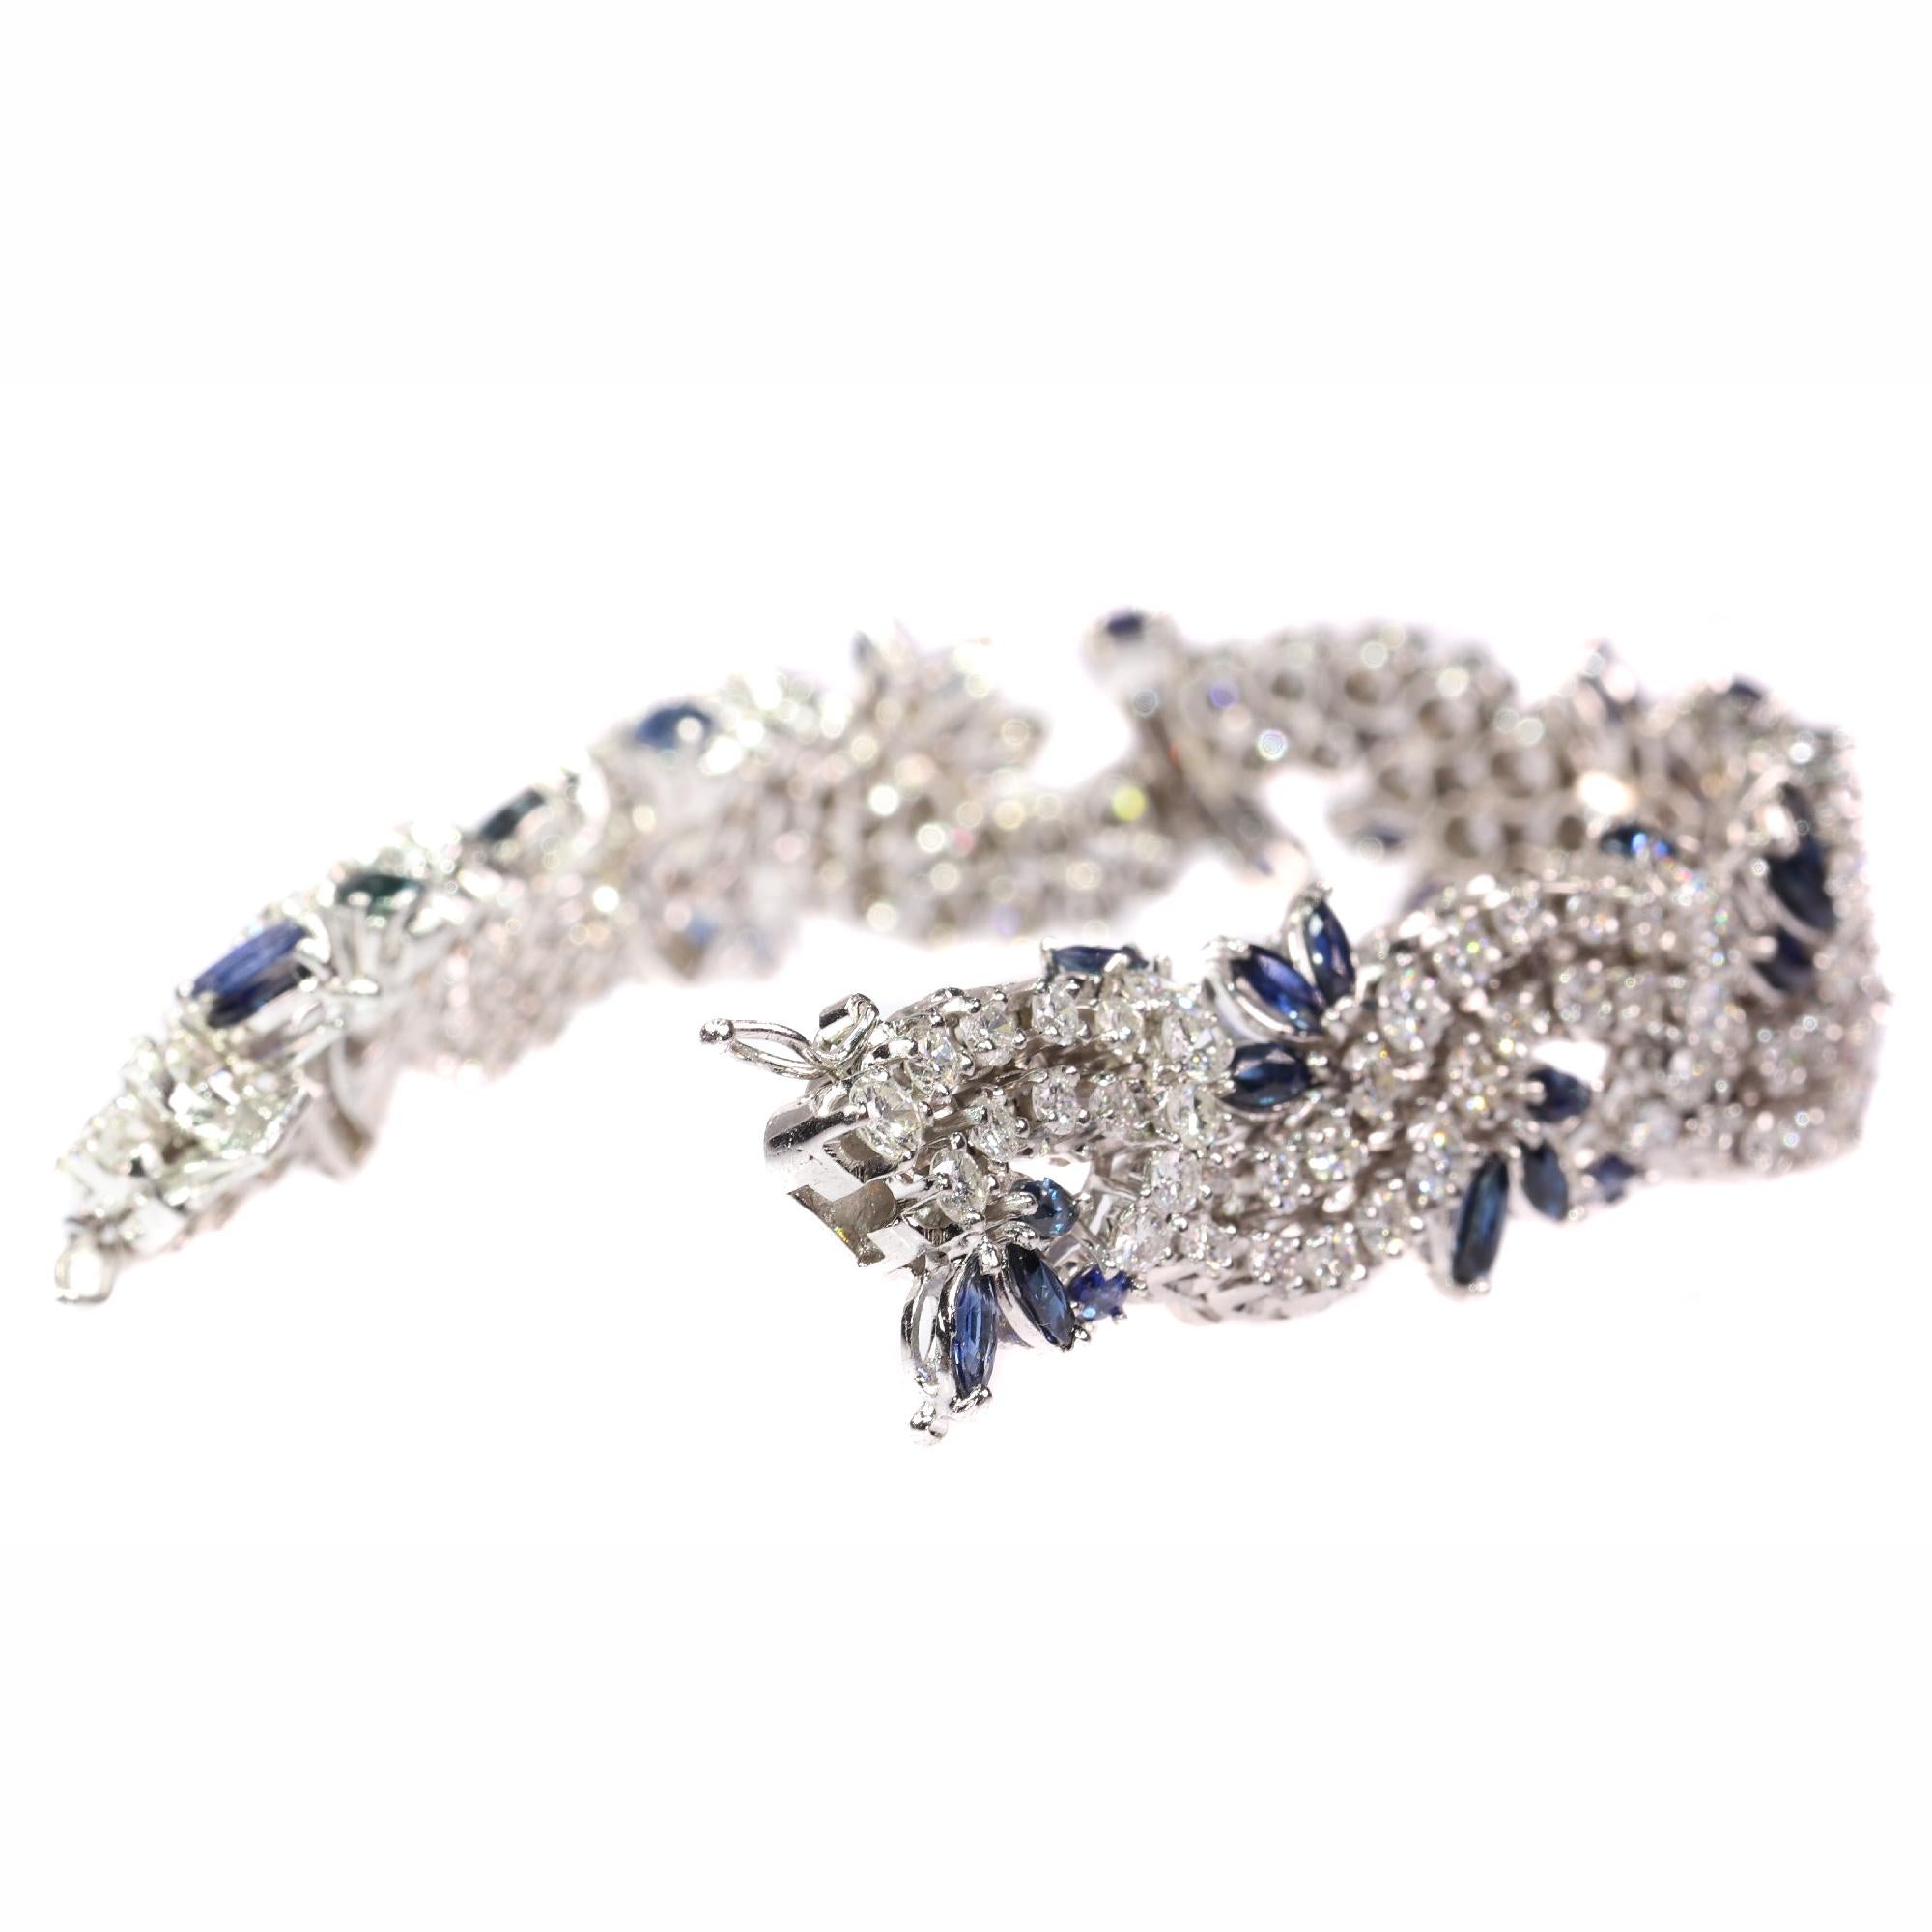 Women's Vintage Bracelet Loaded with Diamonds and Sapphires